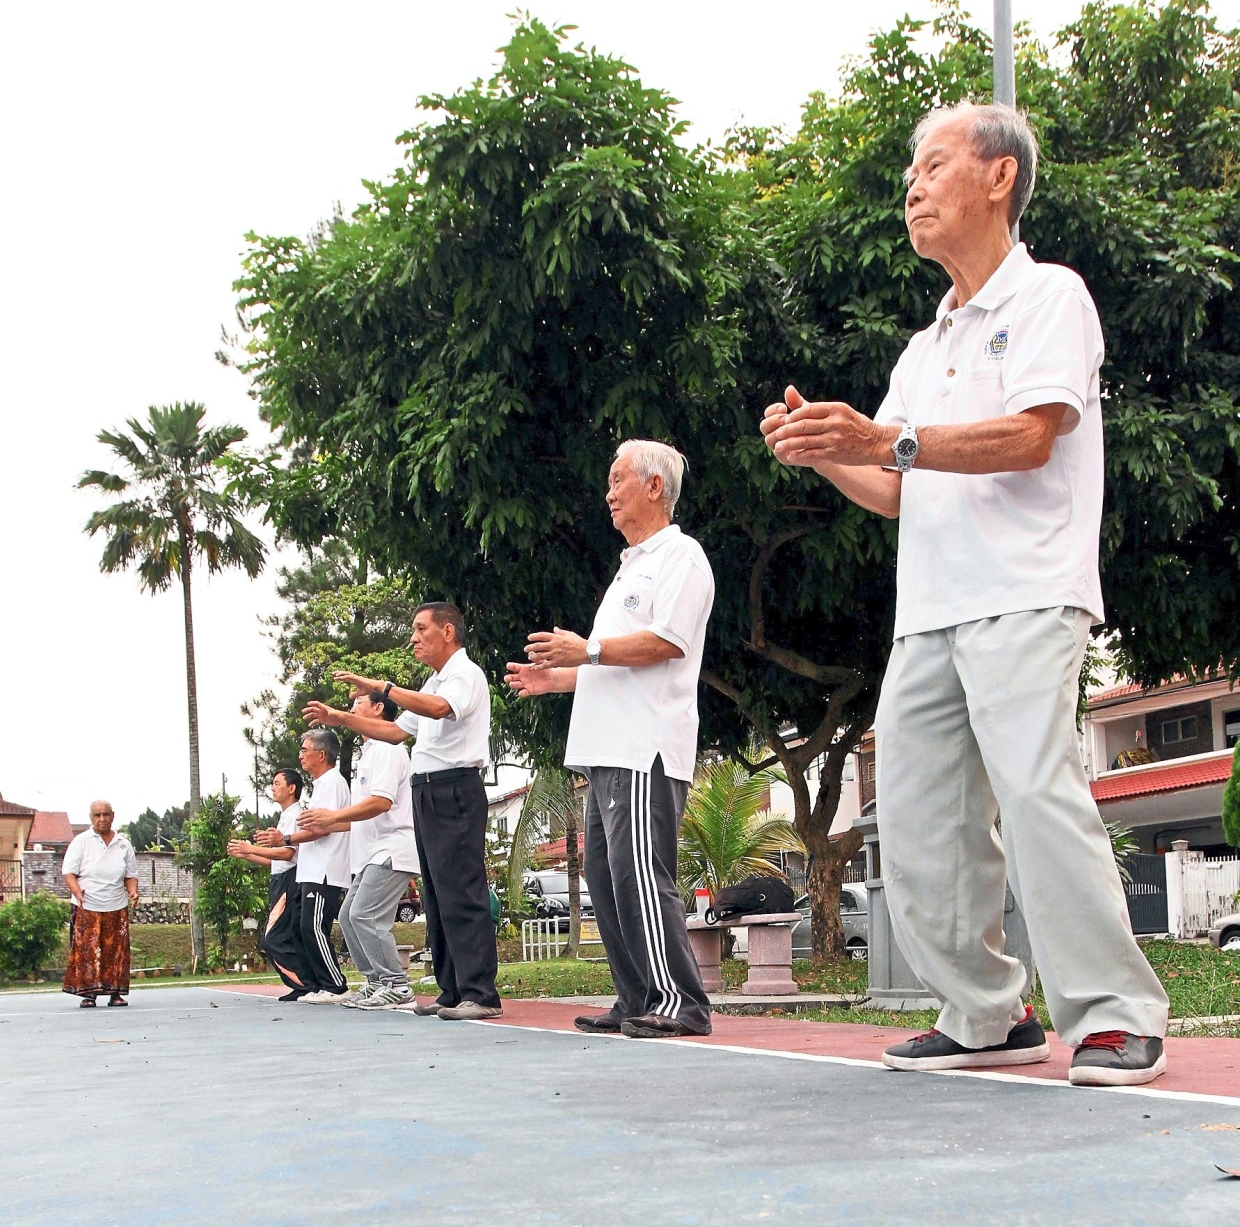 Most of the residents of SS20 in Damansara Utama, PJ are retirees who either live alone or with their spouse. Taking part in community-based activiies is important in staying active and in good health.